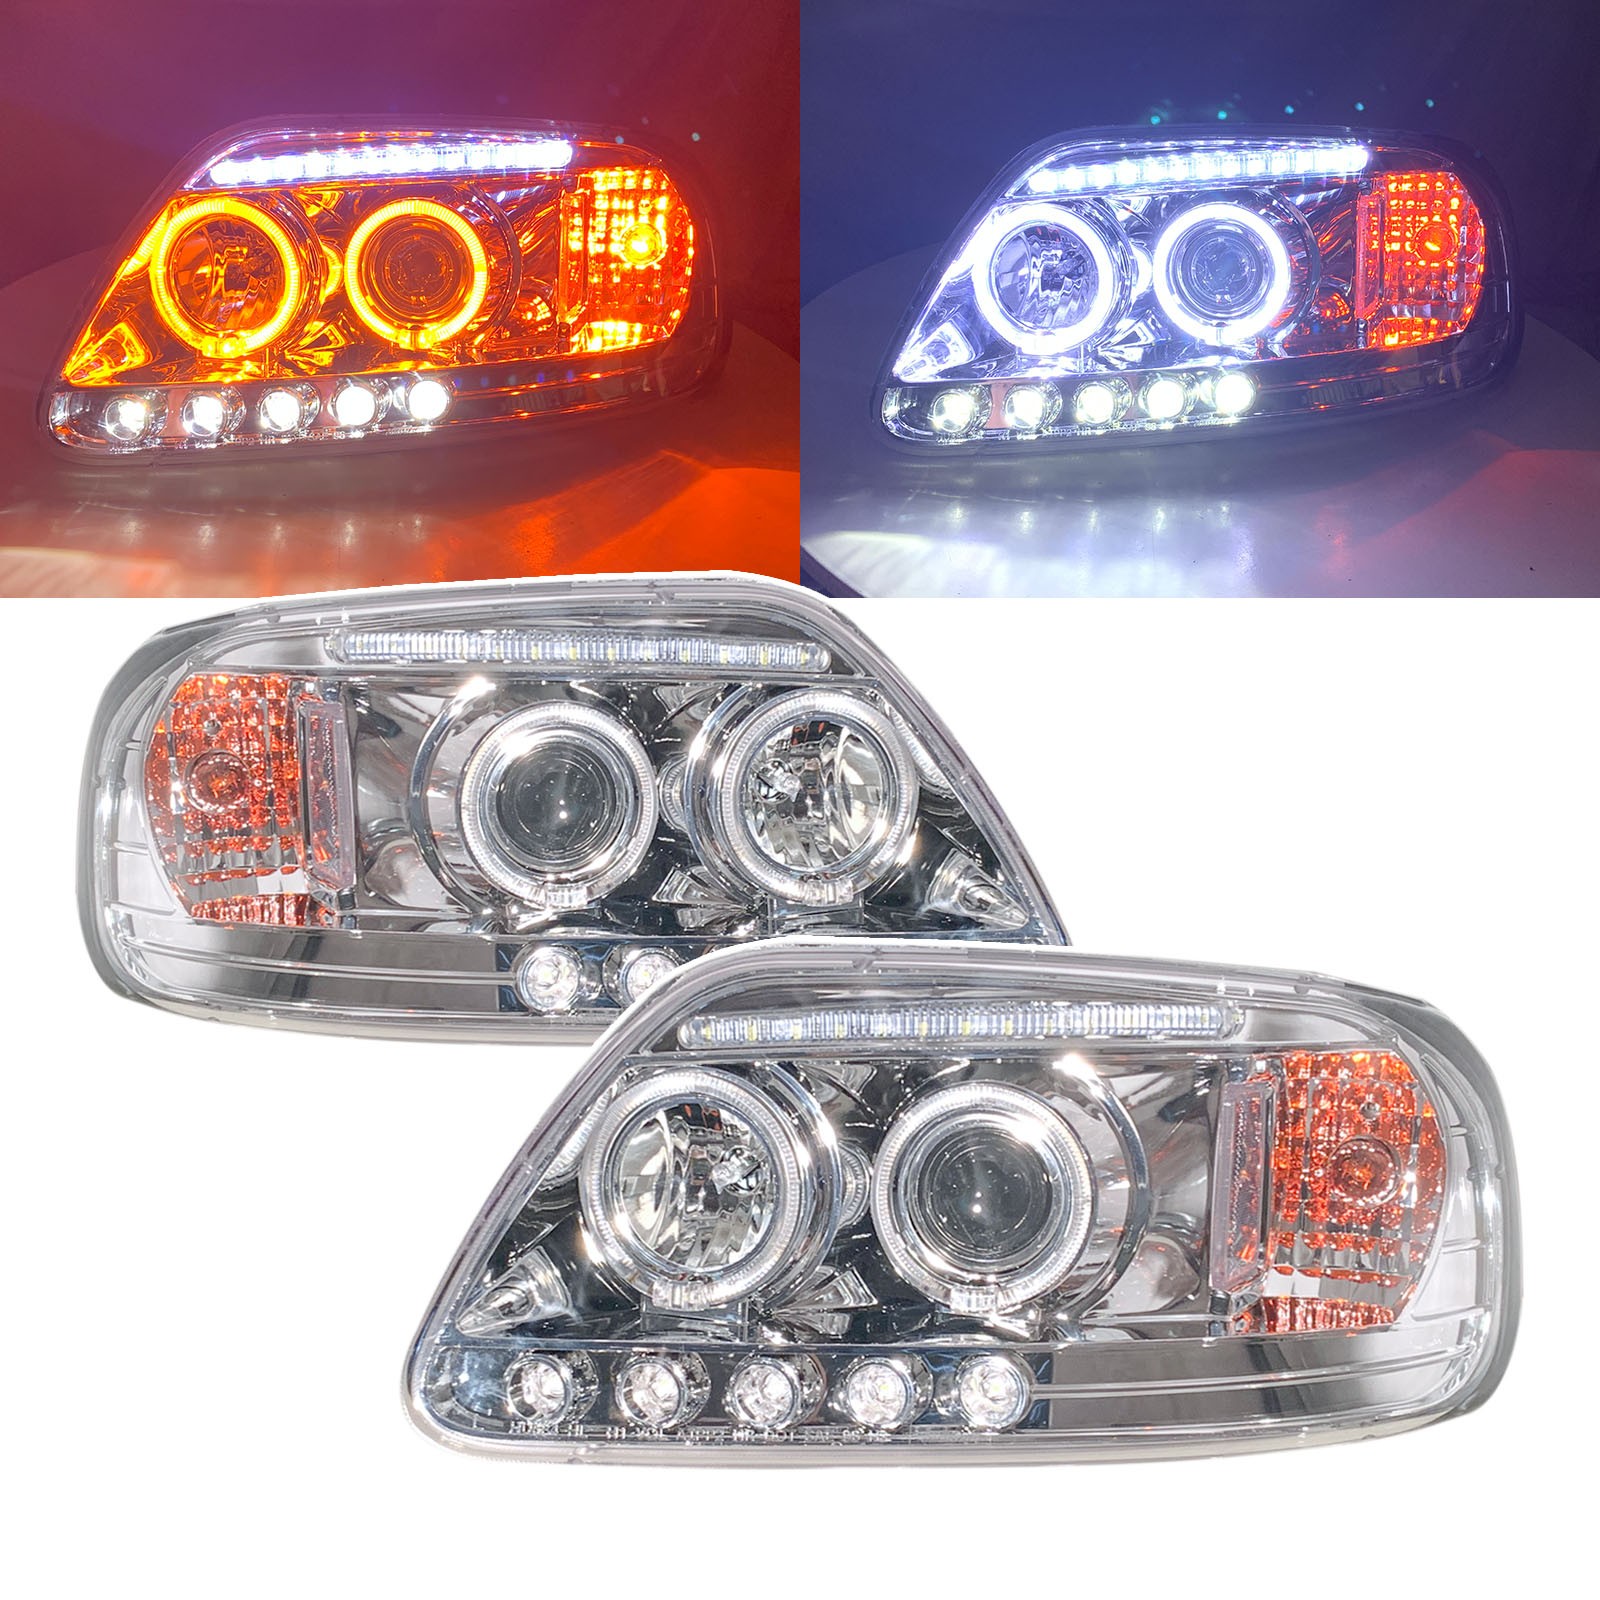 CrazyTheGod F-Series SuperDuty F150 Tenth generation 1997-2003 Pickup 2D/4D Guide LED Angel-Eye Projector Headlight Headlamp Chrome for FORD LHD